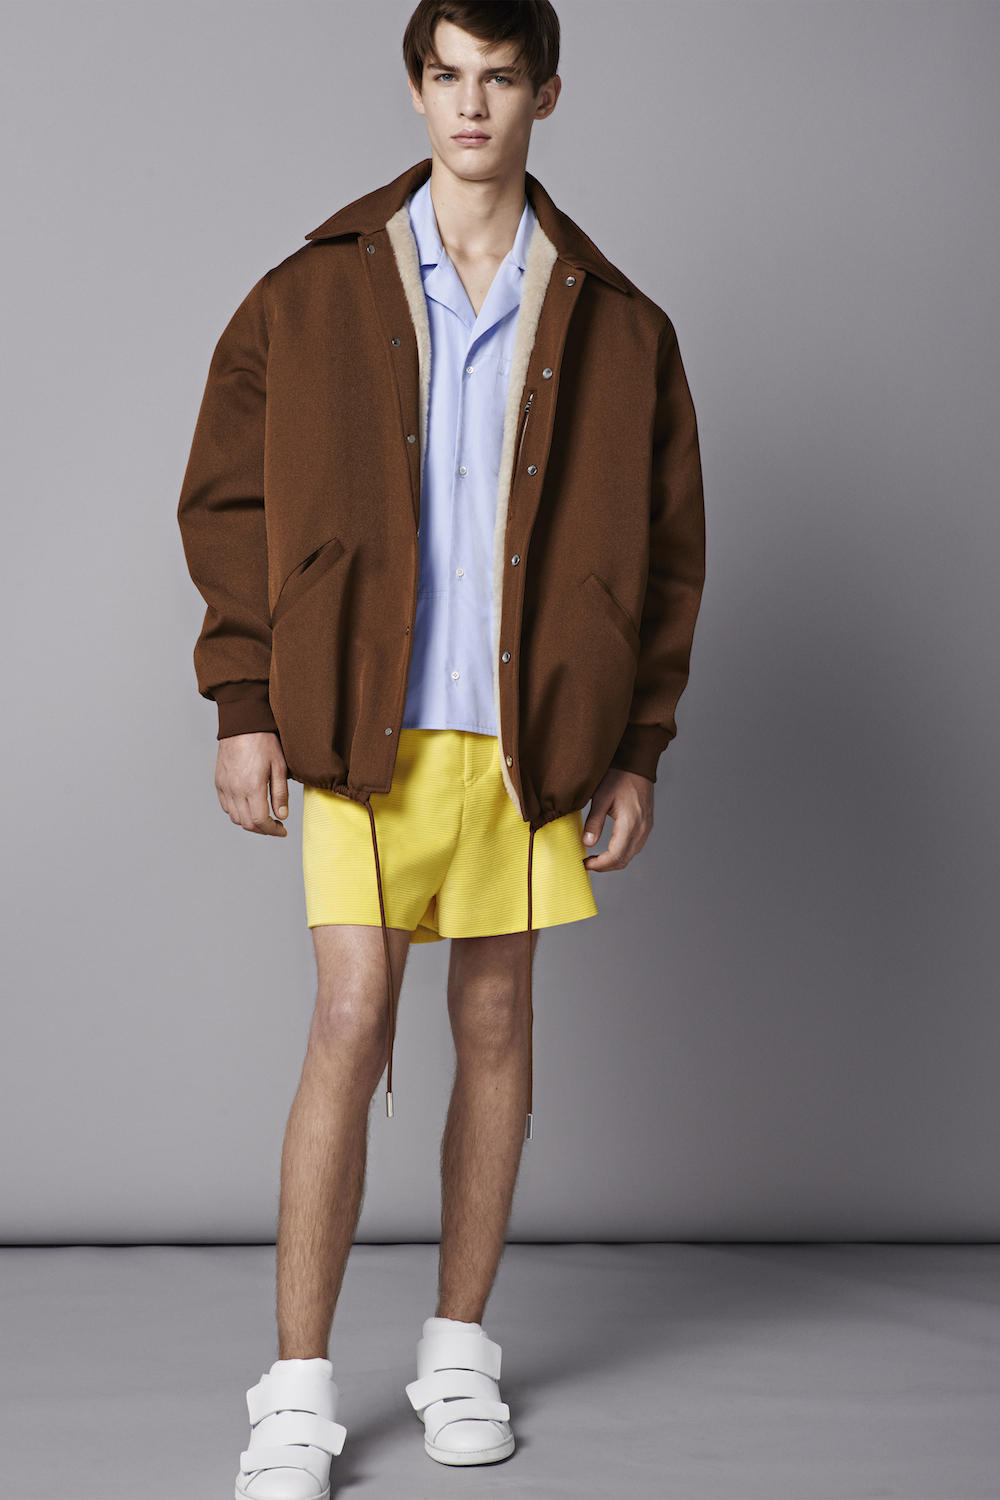 ACNE STUDIOS SS15 TOLD BY JOHNNY JOHANSSON - thesignspeaking